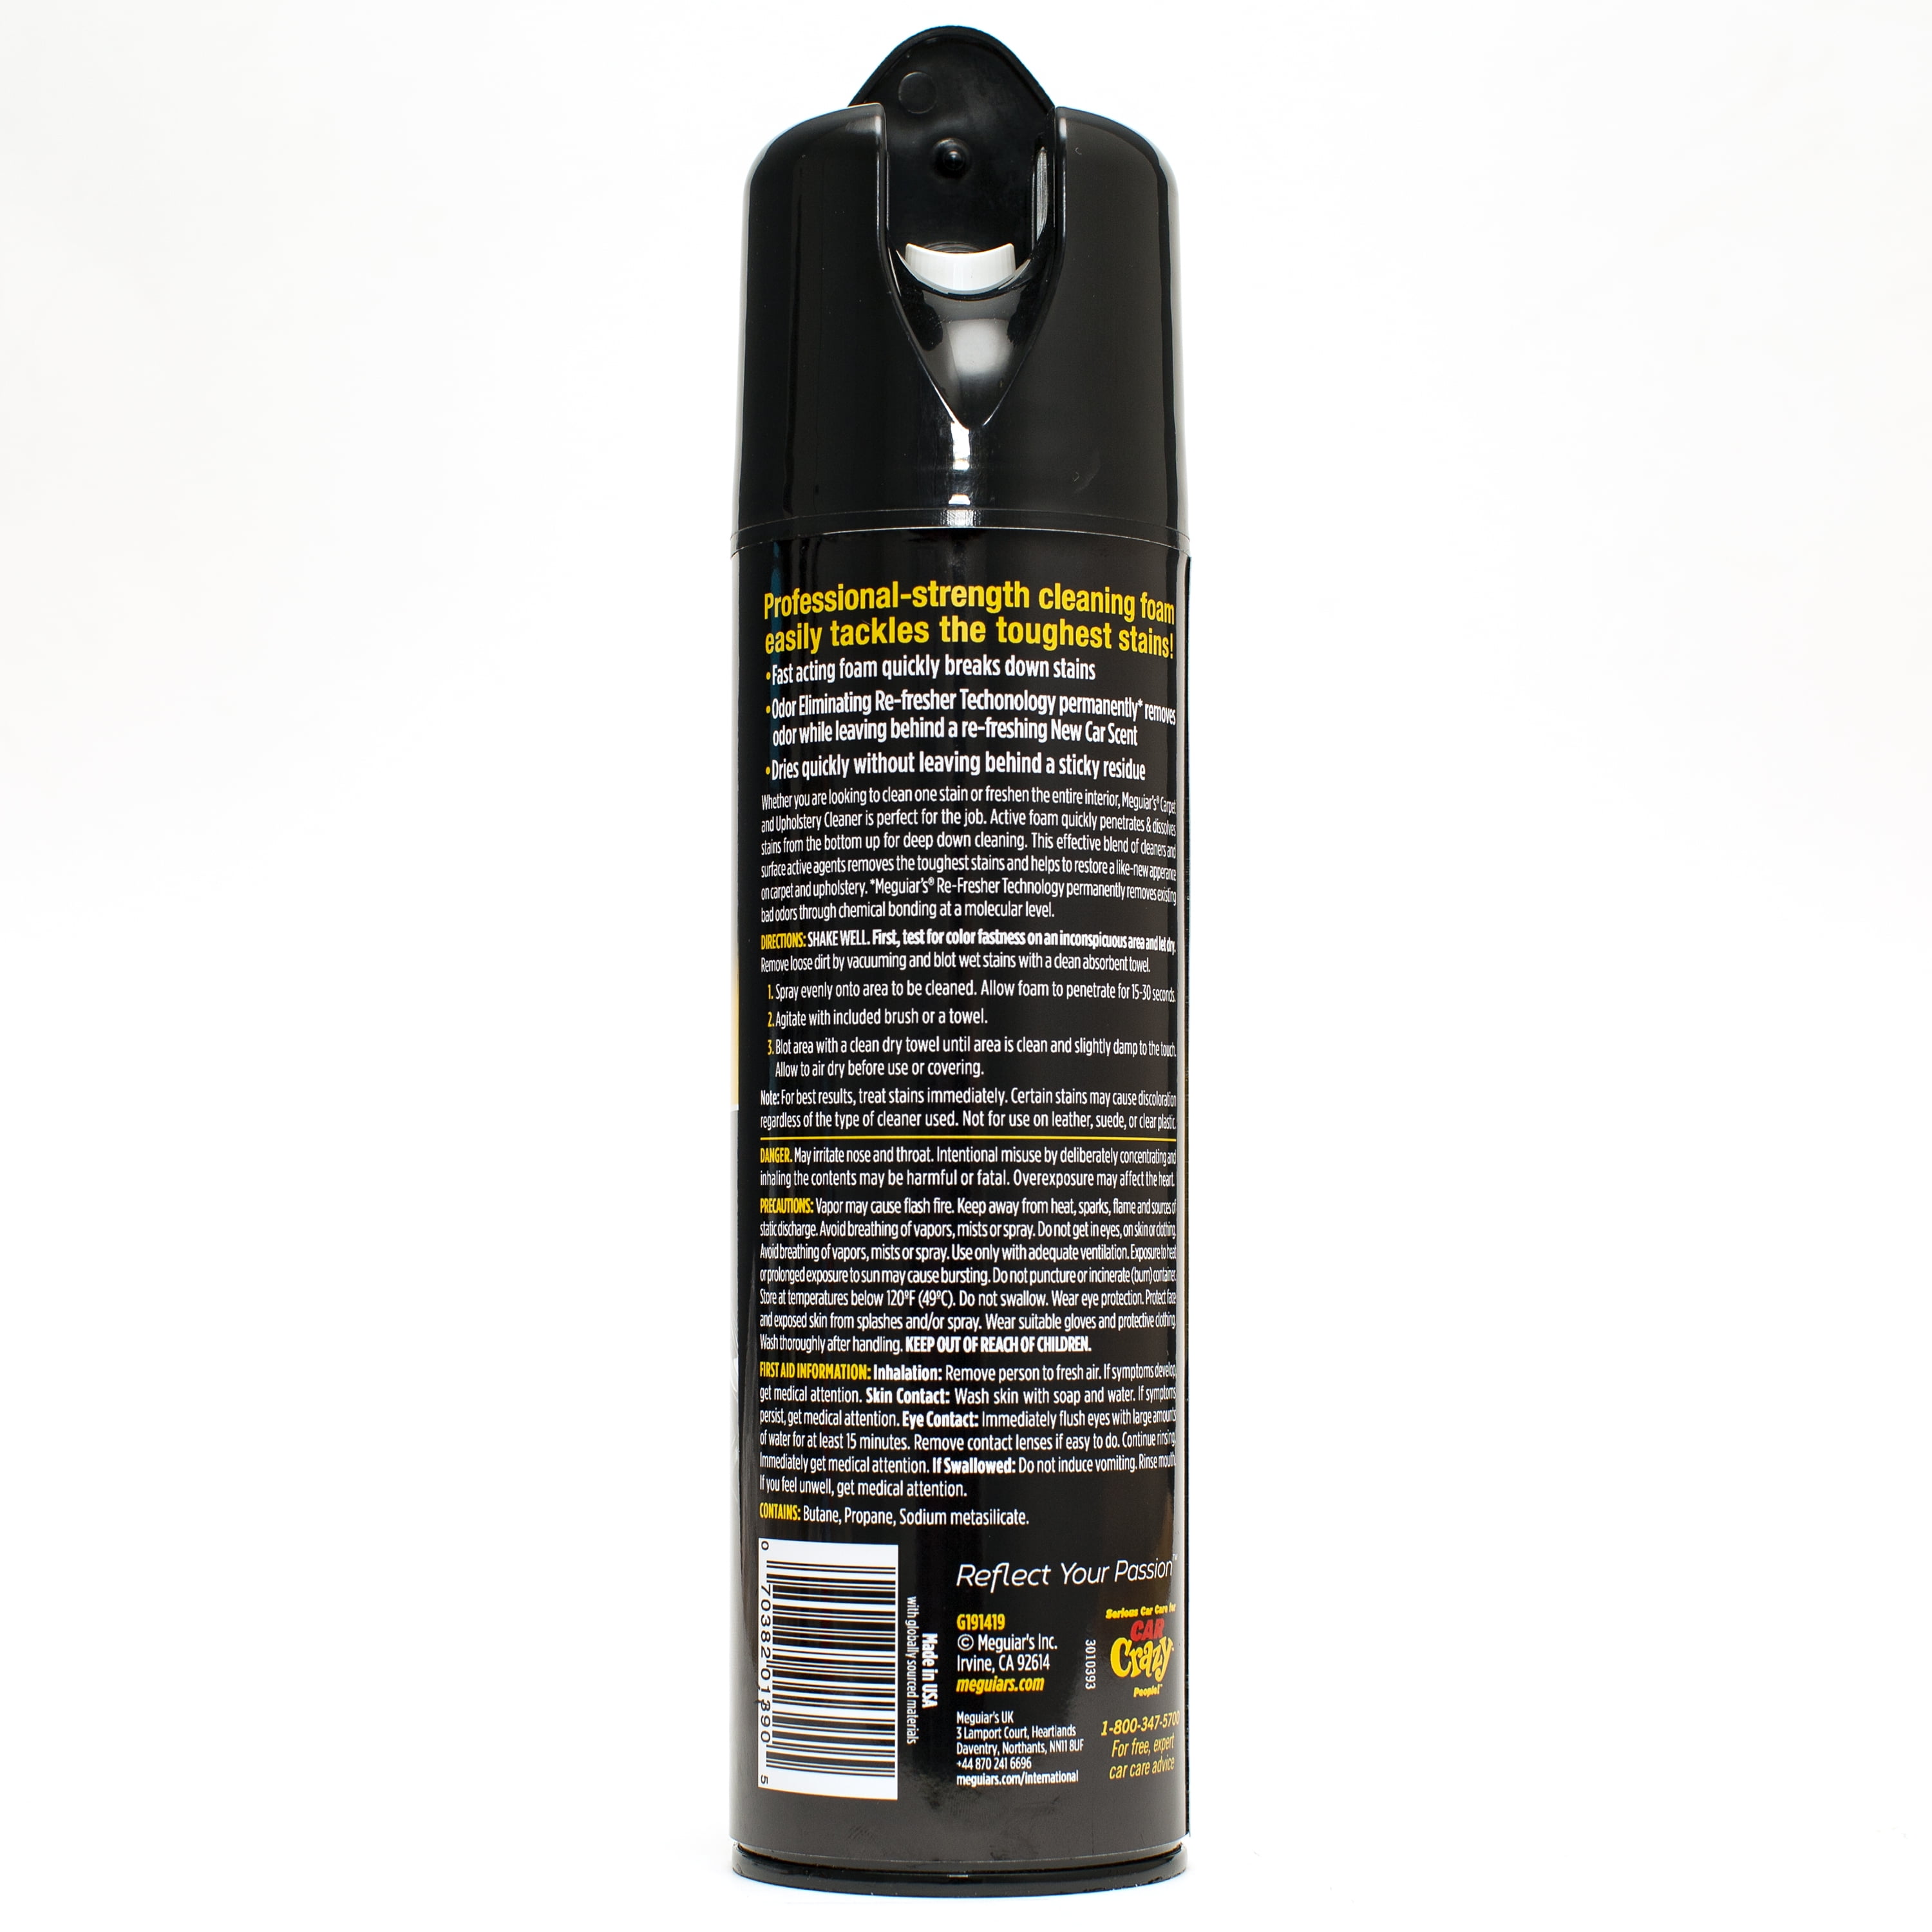 Henry's Professional Carpet and Upholstery Cleaner Refill 